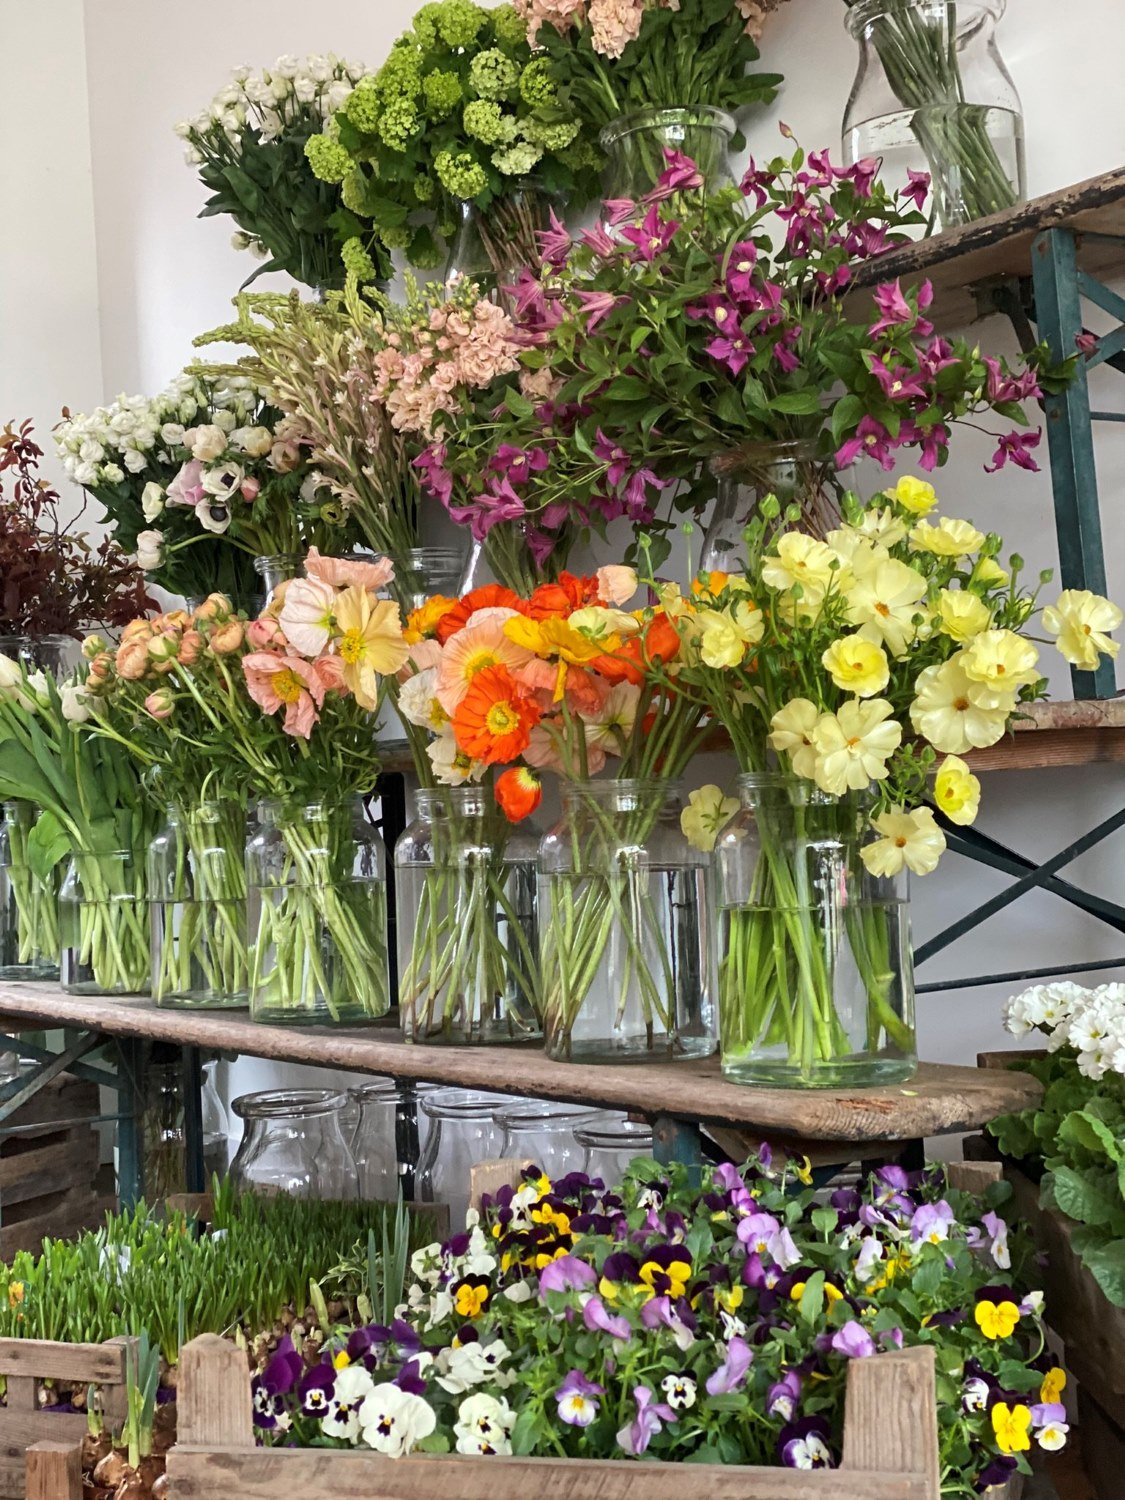 Bath Flower School's stand looking full of bright spring flowers and plants